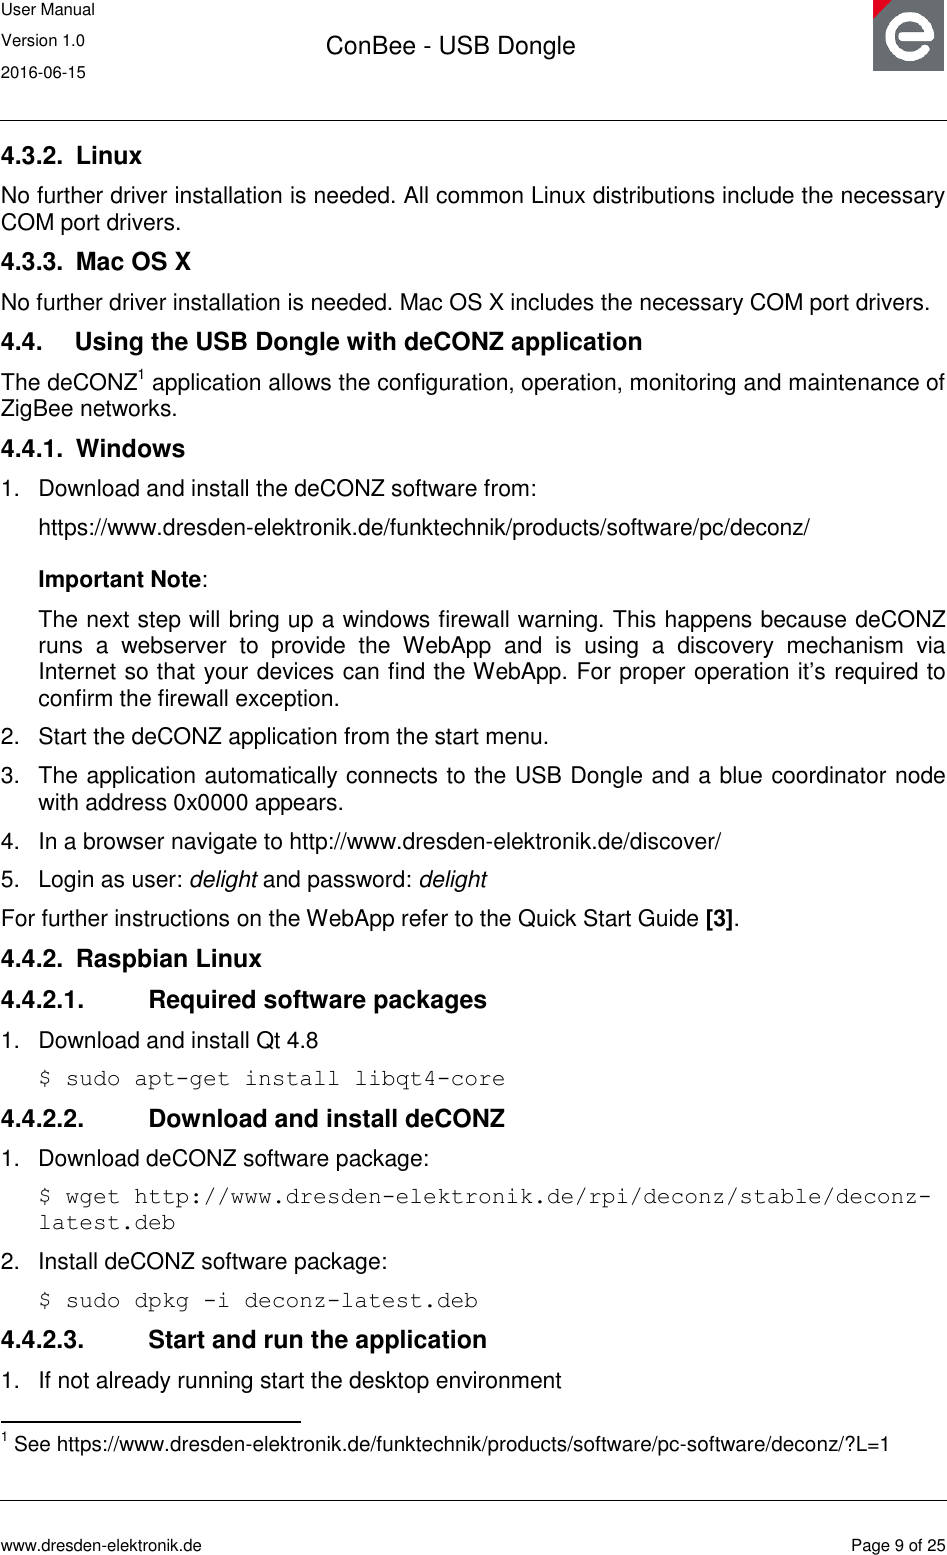 User Manual Version 1.0 2016-06-15  ConBee - USB Dongle      www.dresden-elektronik.de  Page 9 of 25  4.3.2.  Linux No further driver installation is needed. All common Linux distributions include the necessary COM port drivers. 4.3.3.  Mac OS X No further driver installation is needed. Mac OS X includes the necessary COM port drivers. 4.4.  Using the USB Dongle with deCONZ application The deCONZ1 application allows the configuration, operation, monitoring and maintenance of ZigBee networks. 4.4.1.  Windows 1.  Download and install the deCONZ software from: https://www.dresden-elektronik.de/funktechnik/products/software/pc/deconz/  Important Note:   The next step will bring up a windows firewall warning. This happens because deCONZ runs  a  webserver  to  provide  the  WebApp  and  is  using  a  discovery  mechanism  via Internet so that your devices can find the WebApp. For proper operation it‟s required to confirm the firewall exception. 2.  Start the deCONZ application from the start menu. 3.  The application automatically connects to the USB Dongle and a blue coordinator node with address 0x0000 appears. 4.  In a browser navigate to http://www.dresden-elektronik.de/discover/ 5.  Login as user: delight and password: delight For further instructions on the WebApp refer to the Quick Start Guide [3]. 4.4.2.  Raspbian Linux 4.4.2.1.  Required software packages 1.  Download and install Qt 4.8 $ sudo apt-get install libqt4-core 4.4.2.2.  Download and install deCONZ 1.  Download deCONZ software package: $ wget http://www.dresden-elektronik.de/rpi/deconz/stable/deconz-latest.deb 2.  Install deCONZ software package: $ sudo dpkg -i deconz-latest.deb 4.4.2.3.  Start and run the application 1.  If not already running start the desktop environment                                                 1 See https://www.dresden-elektronik.de/funktechnik/products/software/pc-software/deconz/?L=1  